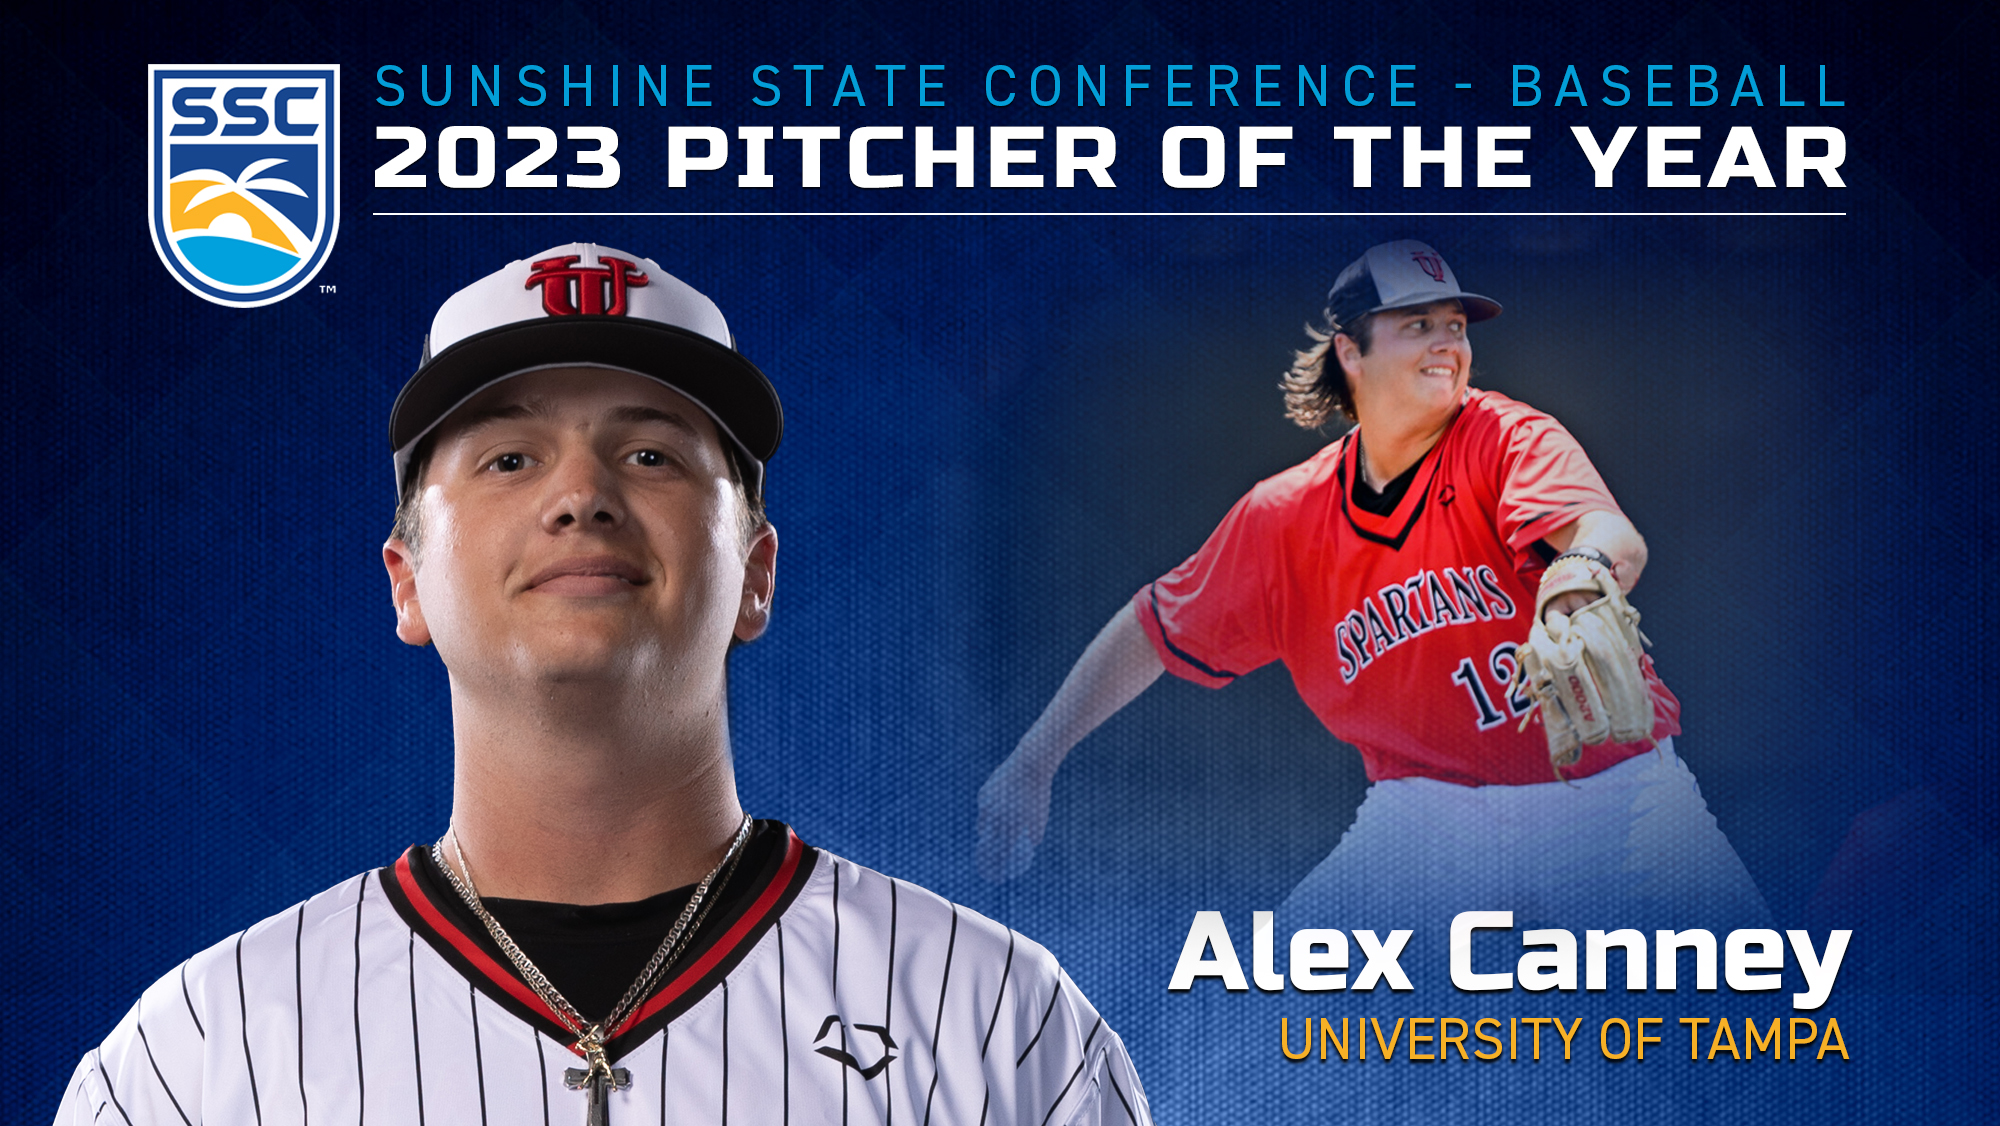 SSC Pitcher of the Year Alex Canney